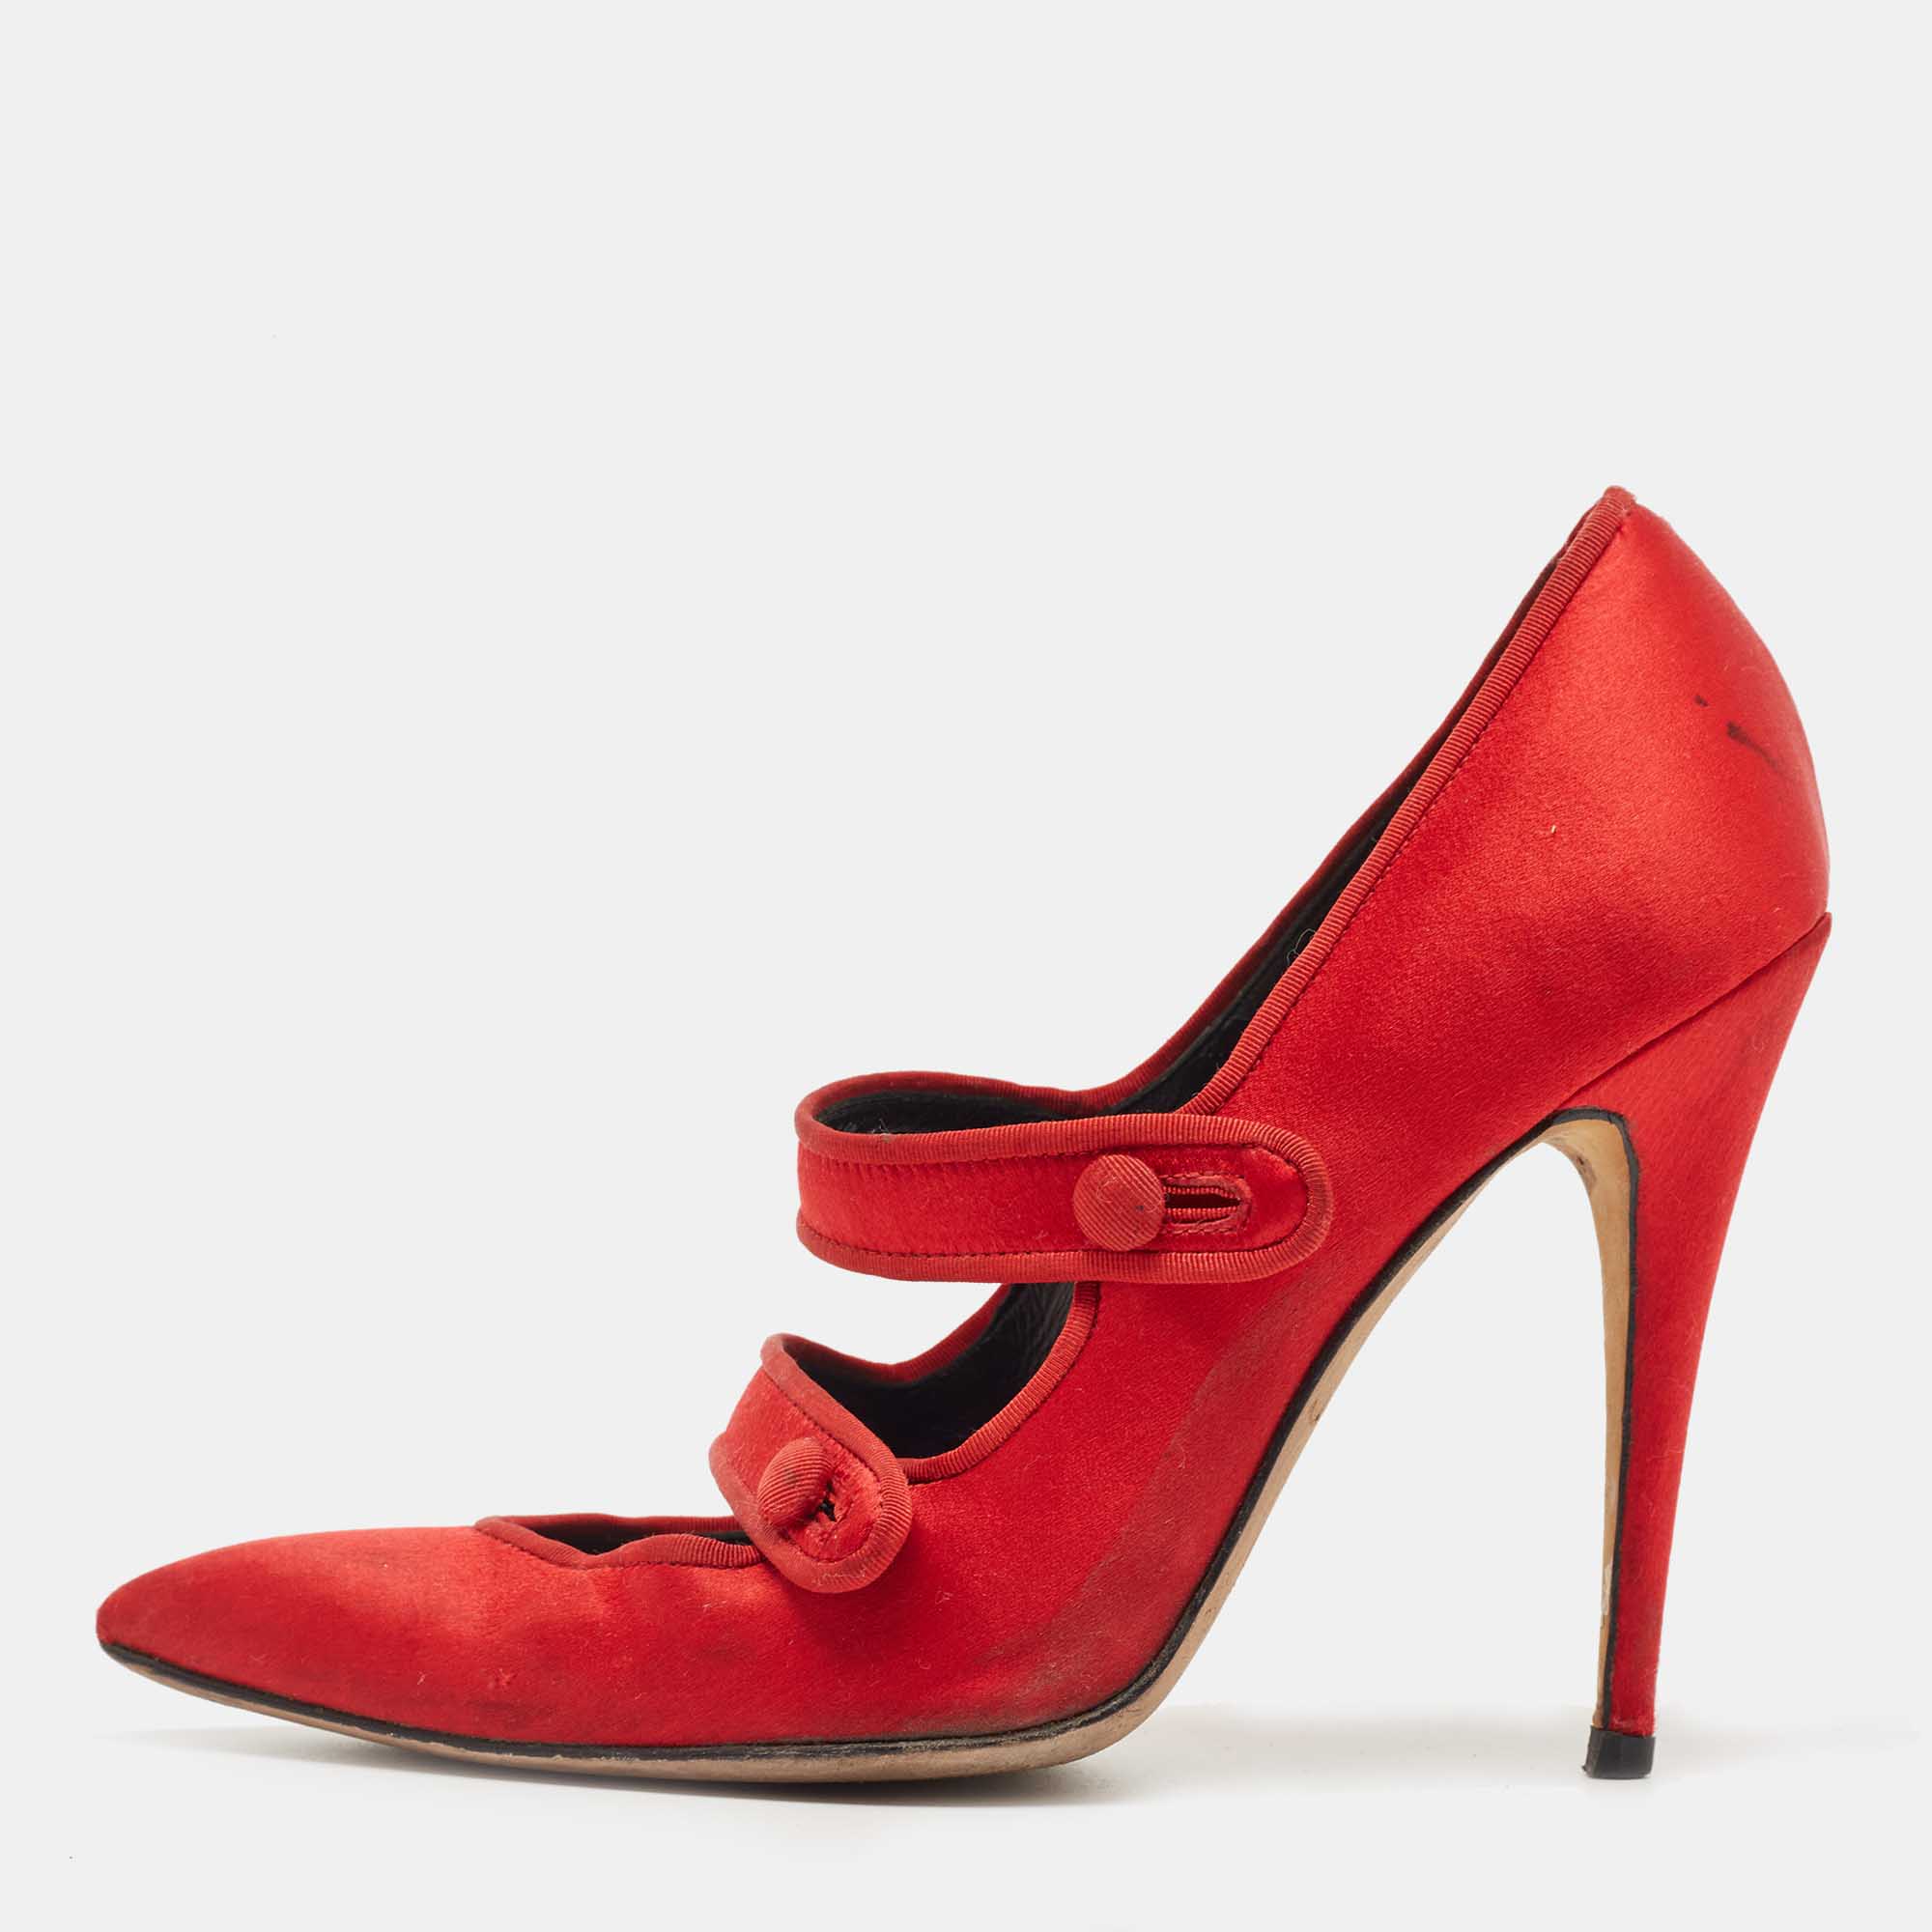 Manolo Blahnik Red Satin Pointed Toe Strap Pumps Size 37